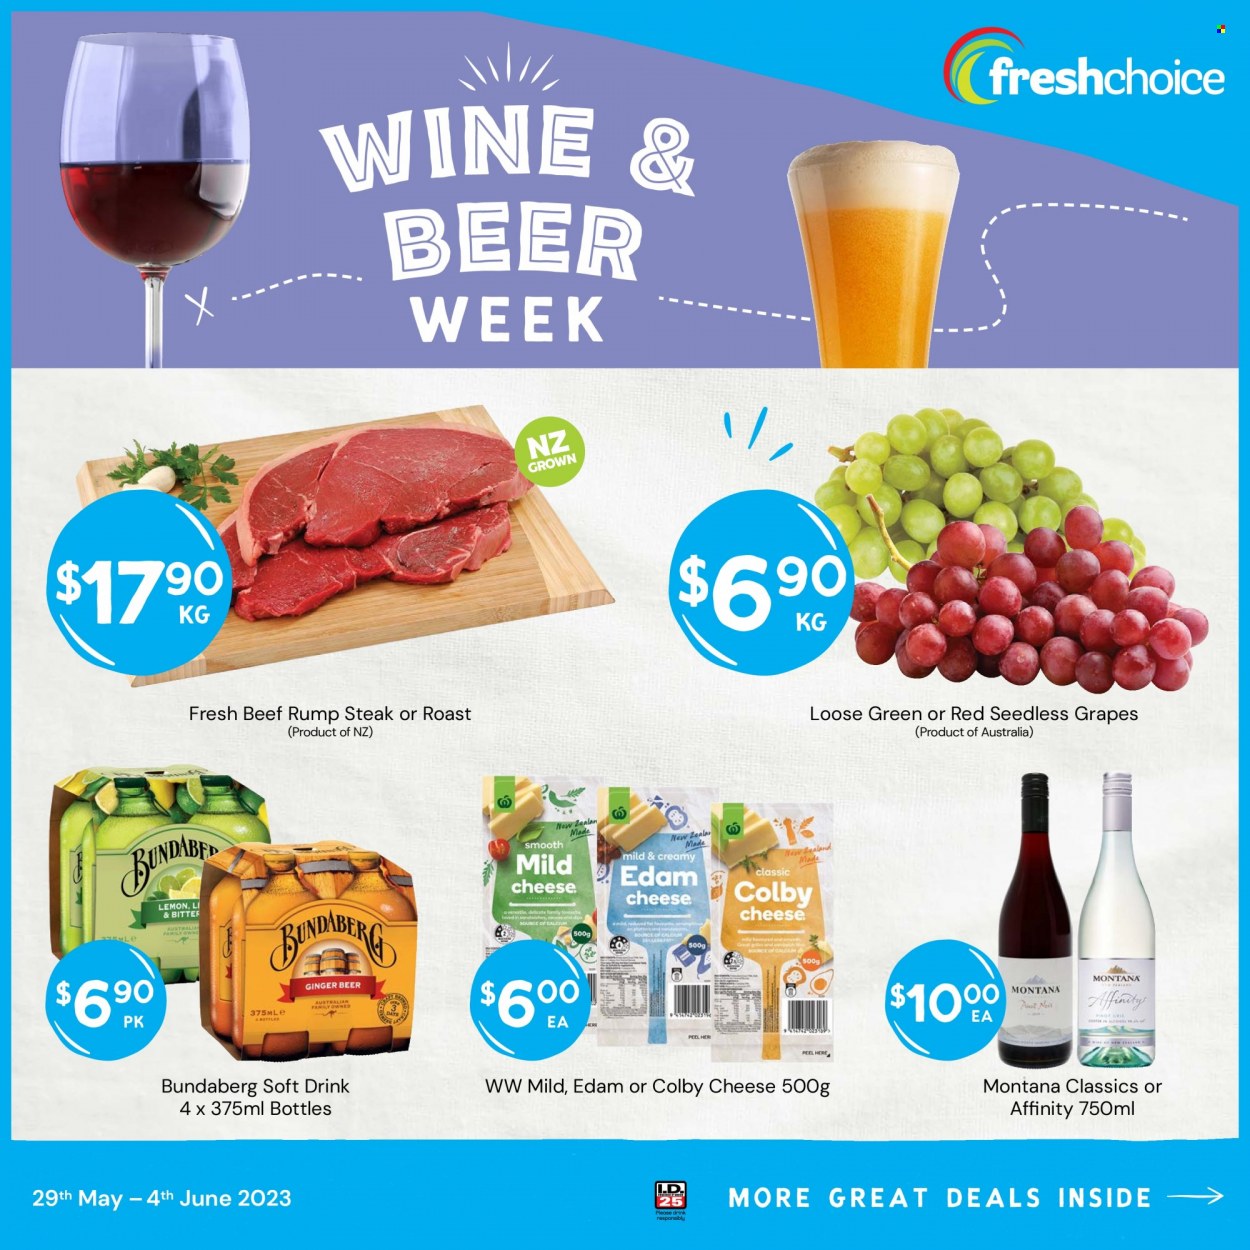 thumbnail - Fresh Choice mailer - 29.05.2023 - 04.06.2023 - Sales products - grapes, seedless grapes, roast, Colby cheese, edam cheese, cheese, mild cheese, soft drink, Bundaberg, red wine, wine, Pinot Noir, alcohol, beer, beef meat, steak, rump steak, ginger beer. Page 1.